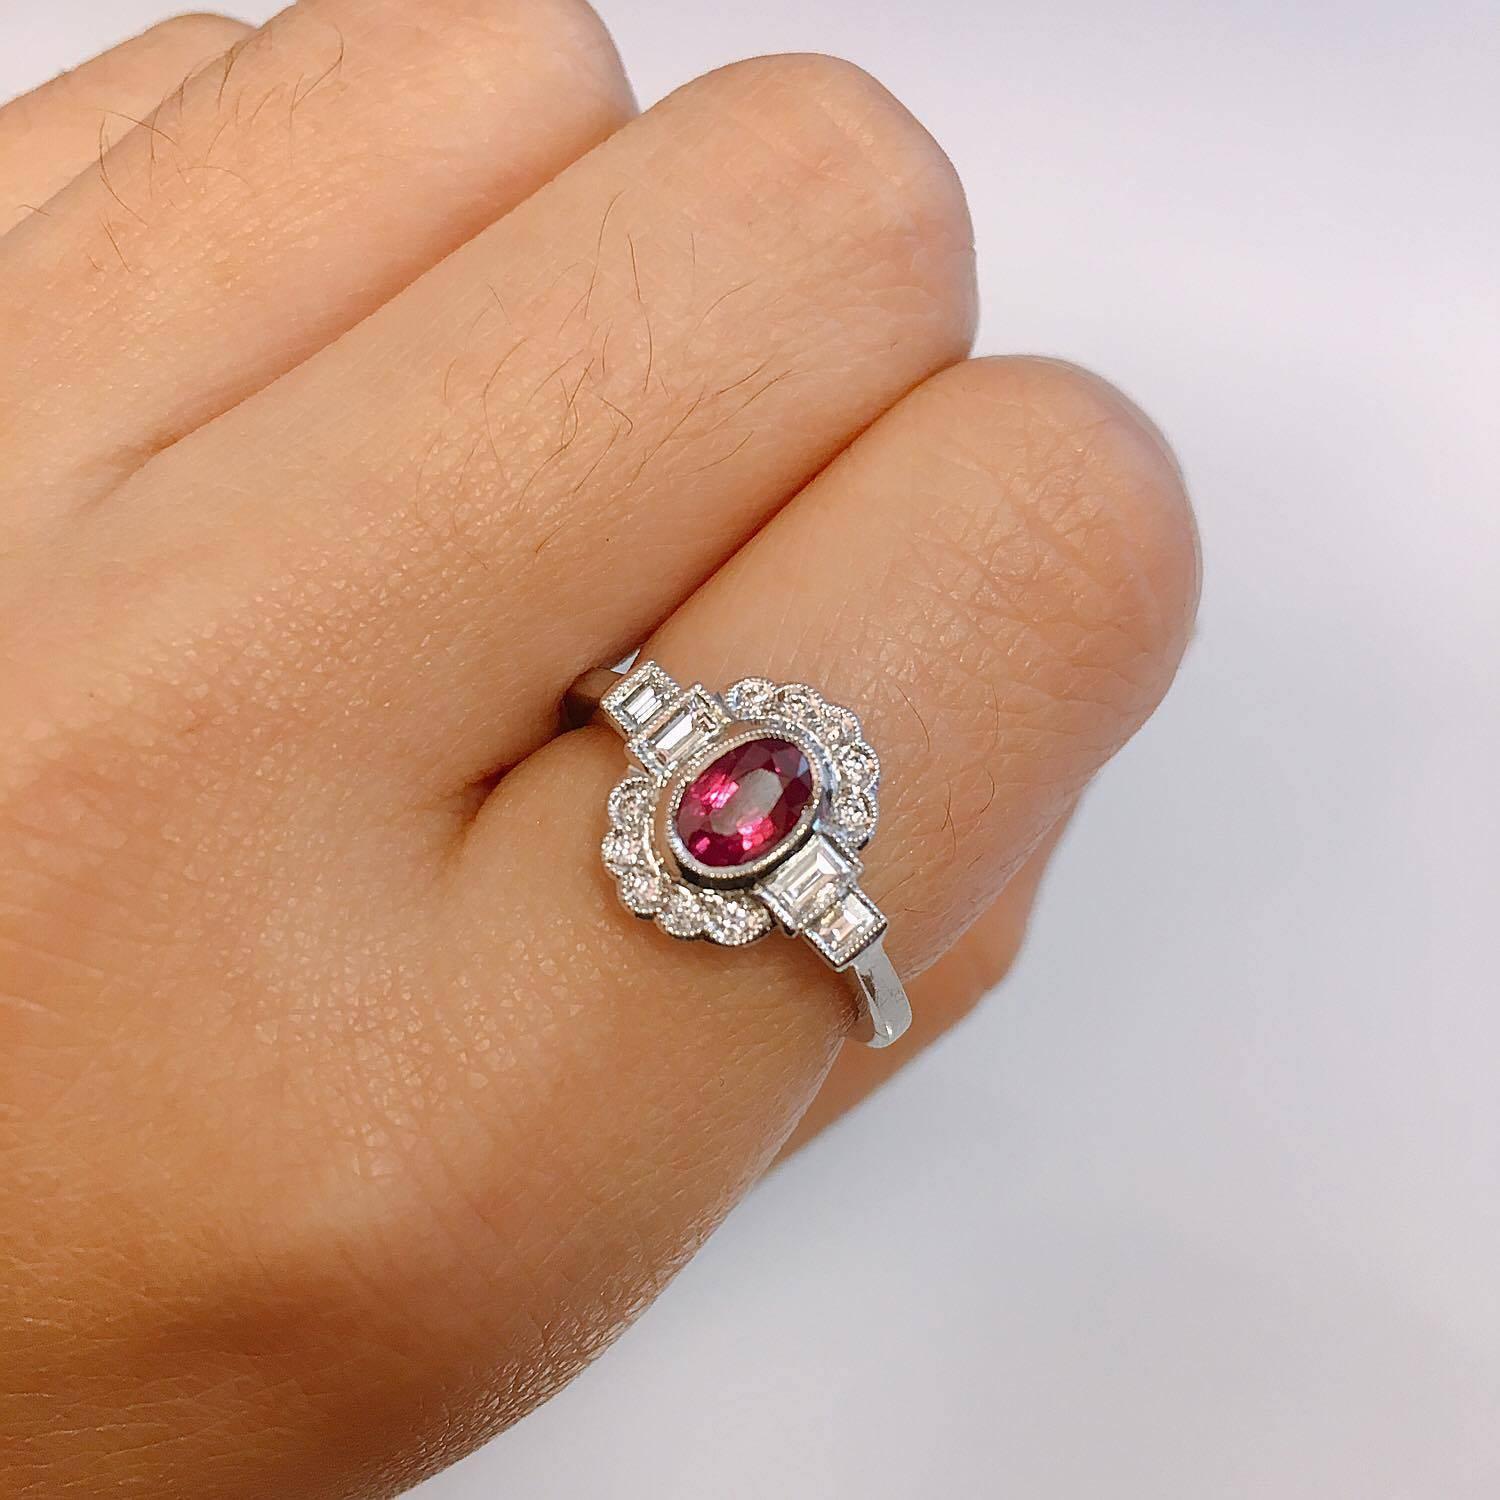 Stunning hand made ring with Emerald cut side stones! 
Diamond Color: E-F
Diamond Clarity: Vvs 
Cut: Excellent 
Size 7 and we can resize this ring so it is ready to wear no charge! 
All Emilio! pieces come with a professional appraisal from GAL, a